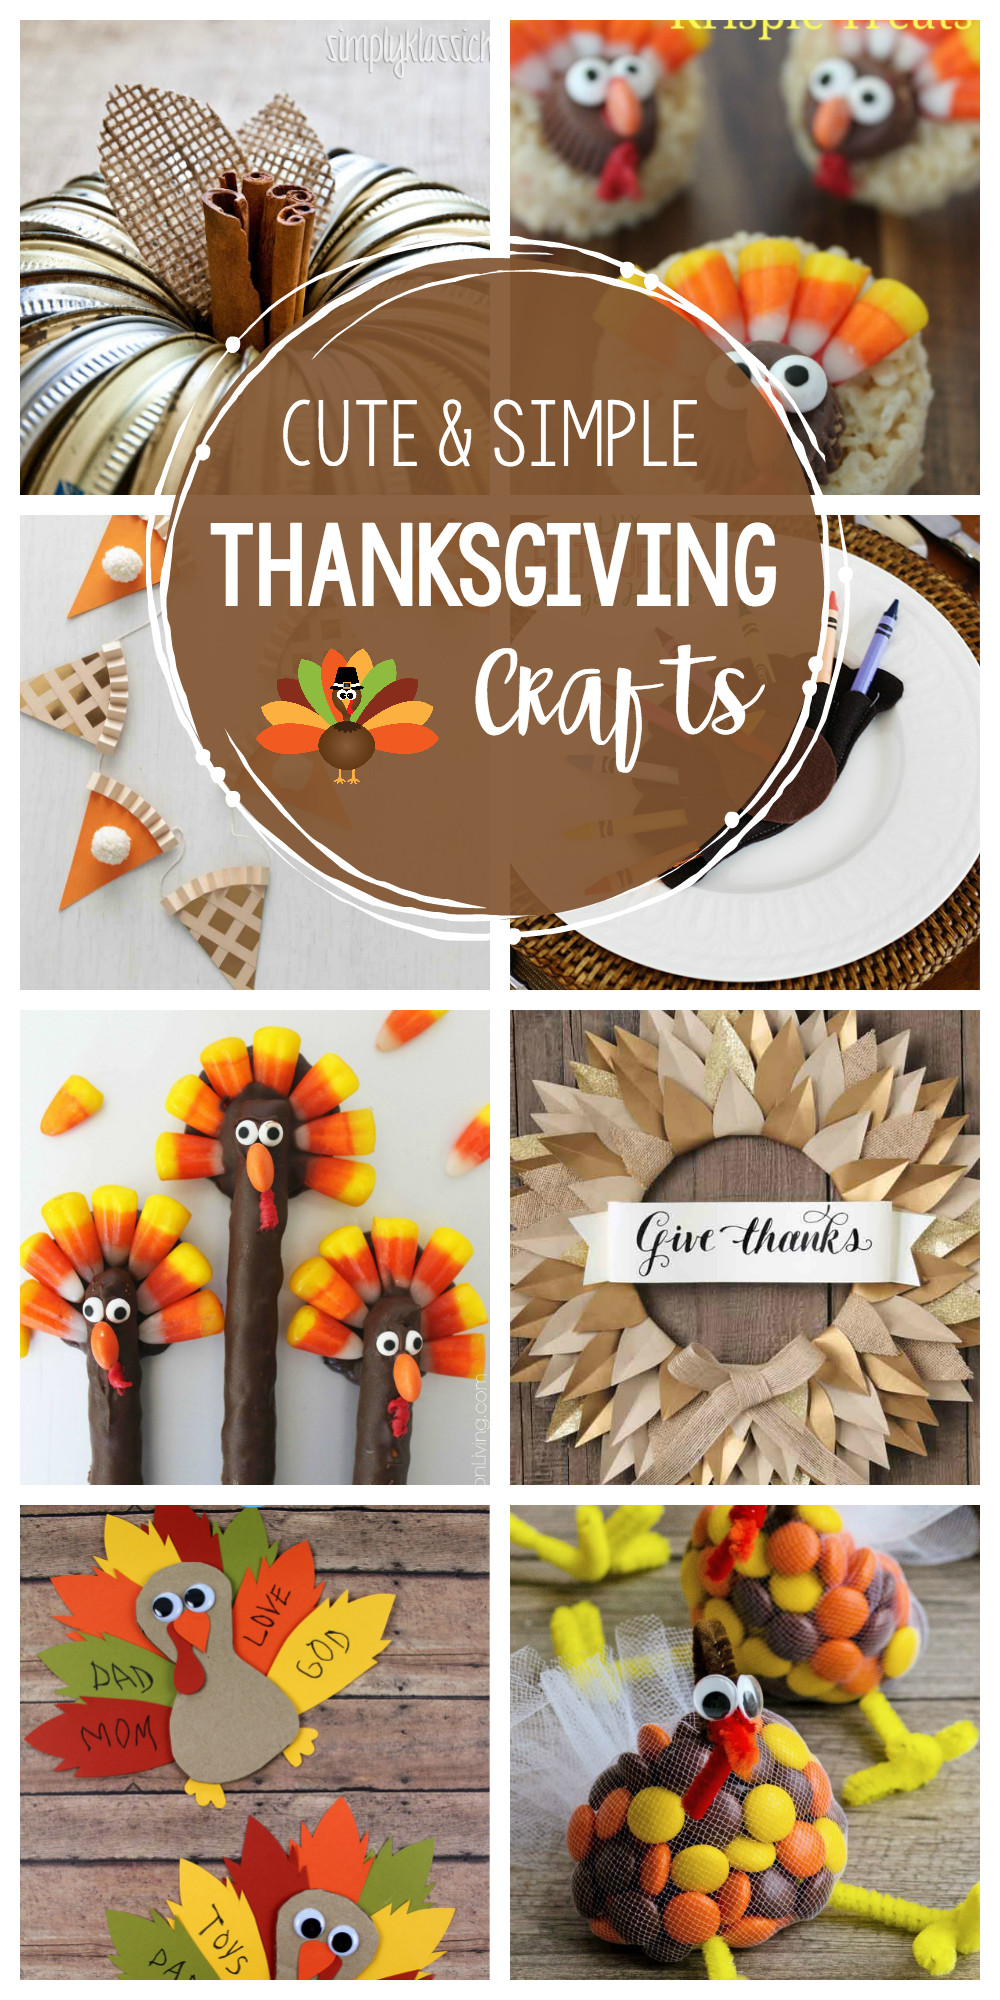 November Crafts For Adults
 Fun & Simple Thanksgiving Crafts to Make This Year